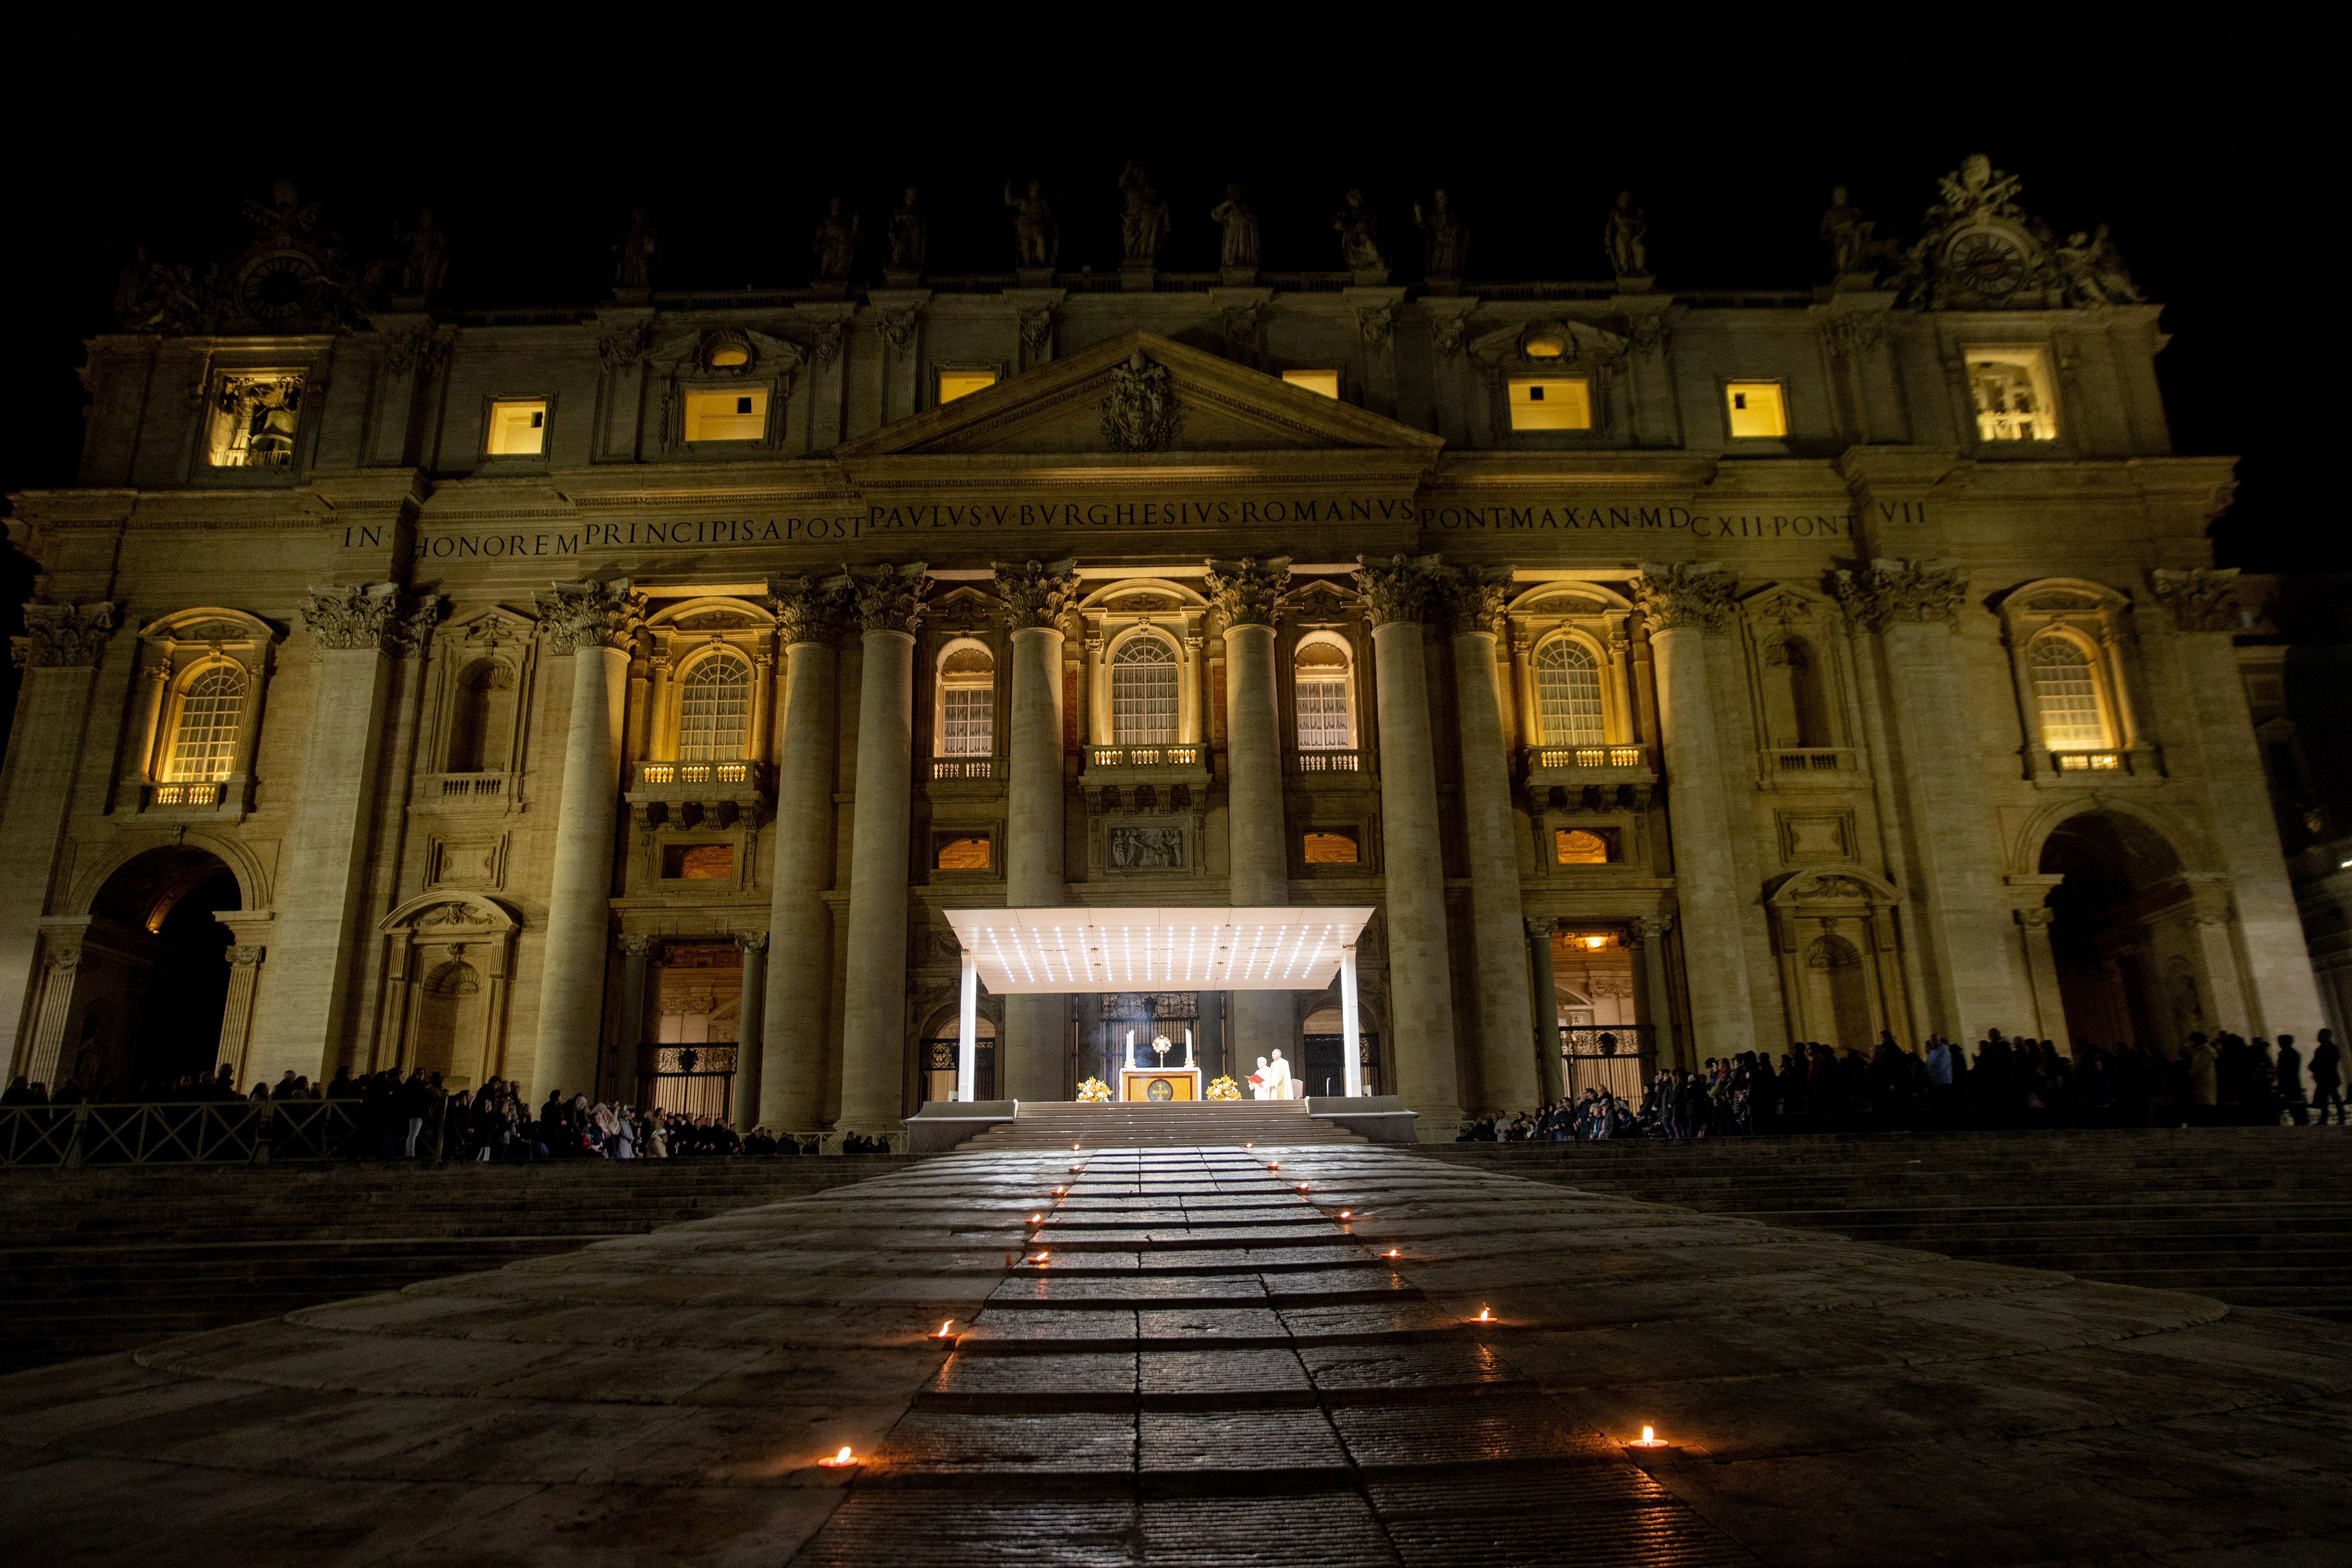 PHOTOS: Nighttime eucharistic adoration in St. Peter’s Square